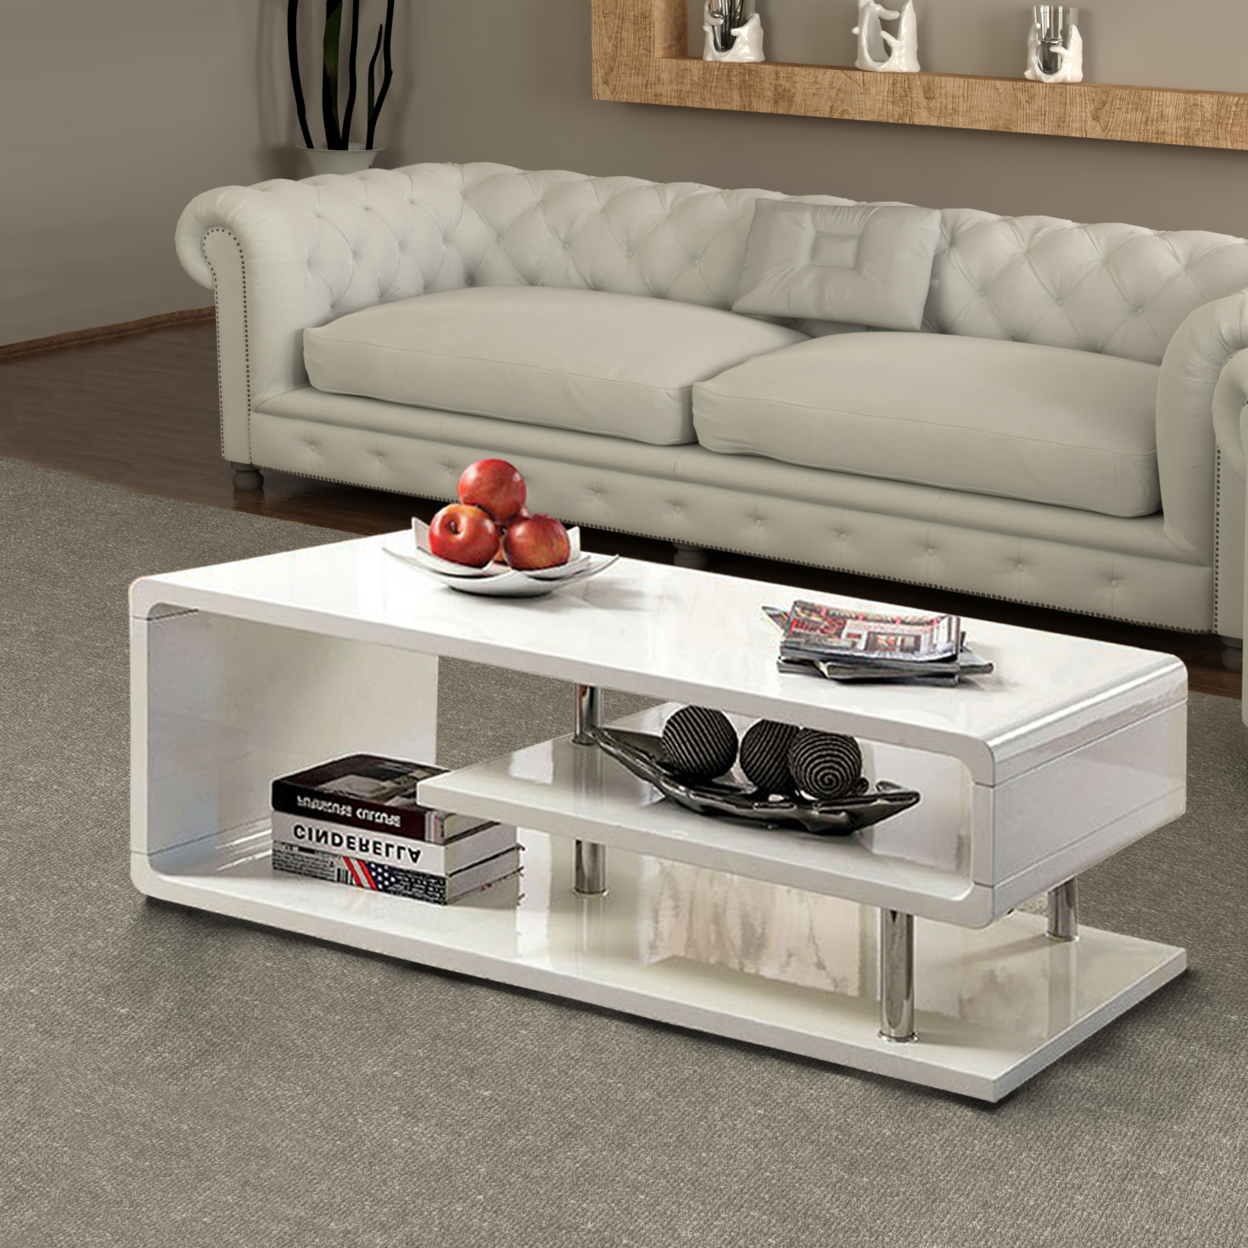 Wooden Coffee Table With Curling Shelf And Metal Poles, White- Saltoro Sherpi